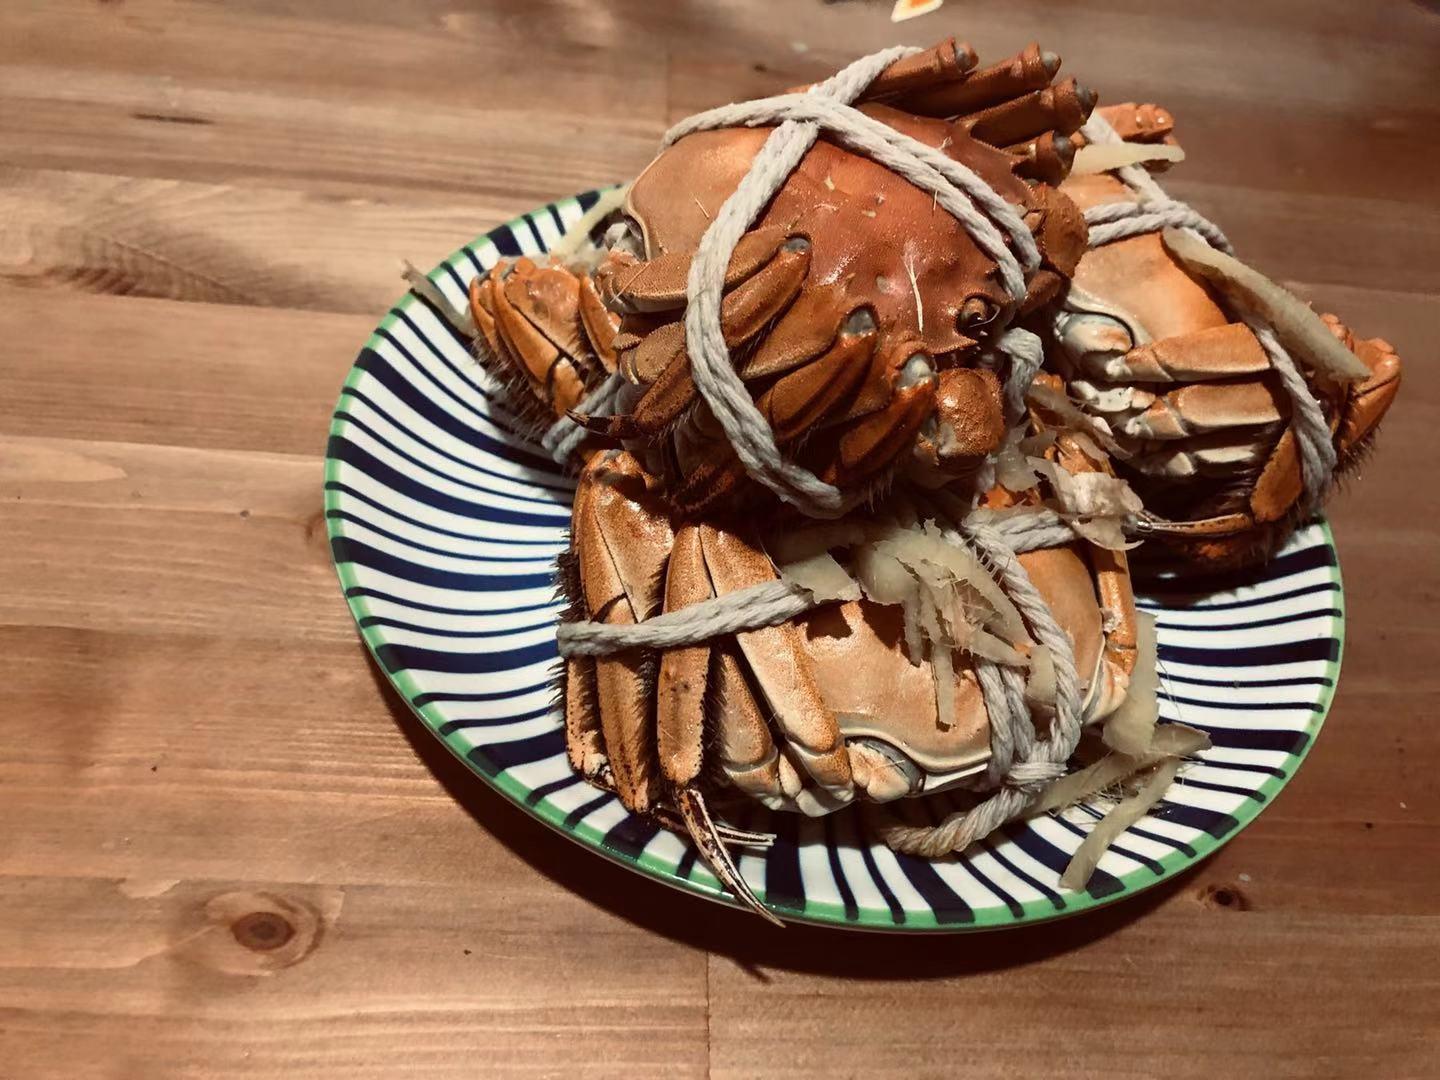 A couple of hairy crabs are shown tied together with a rope and sitting on a striped plate.